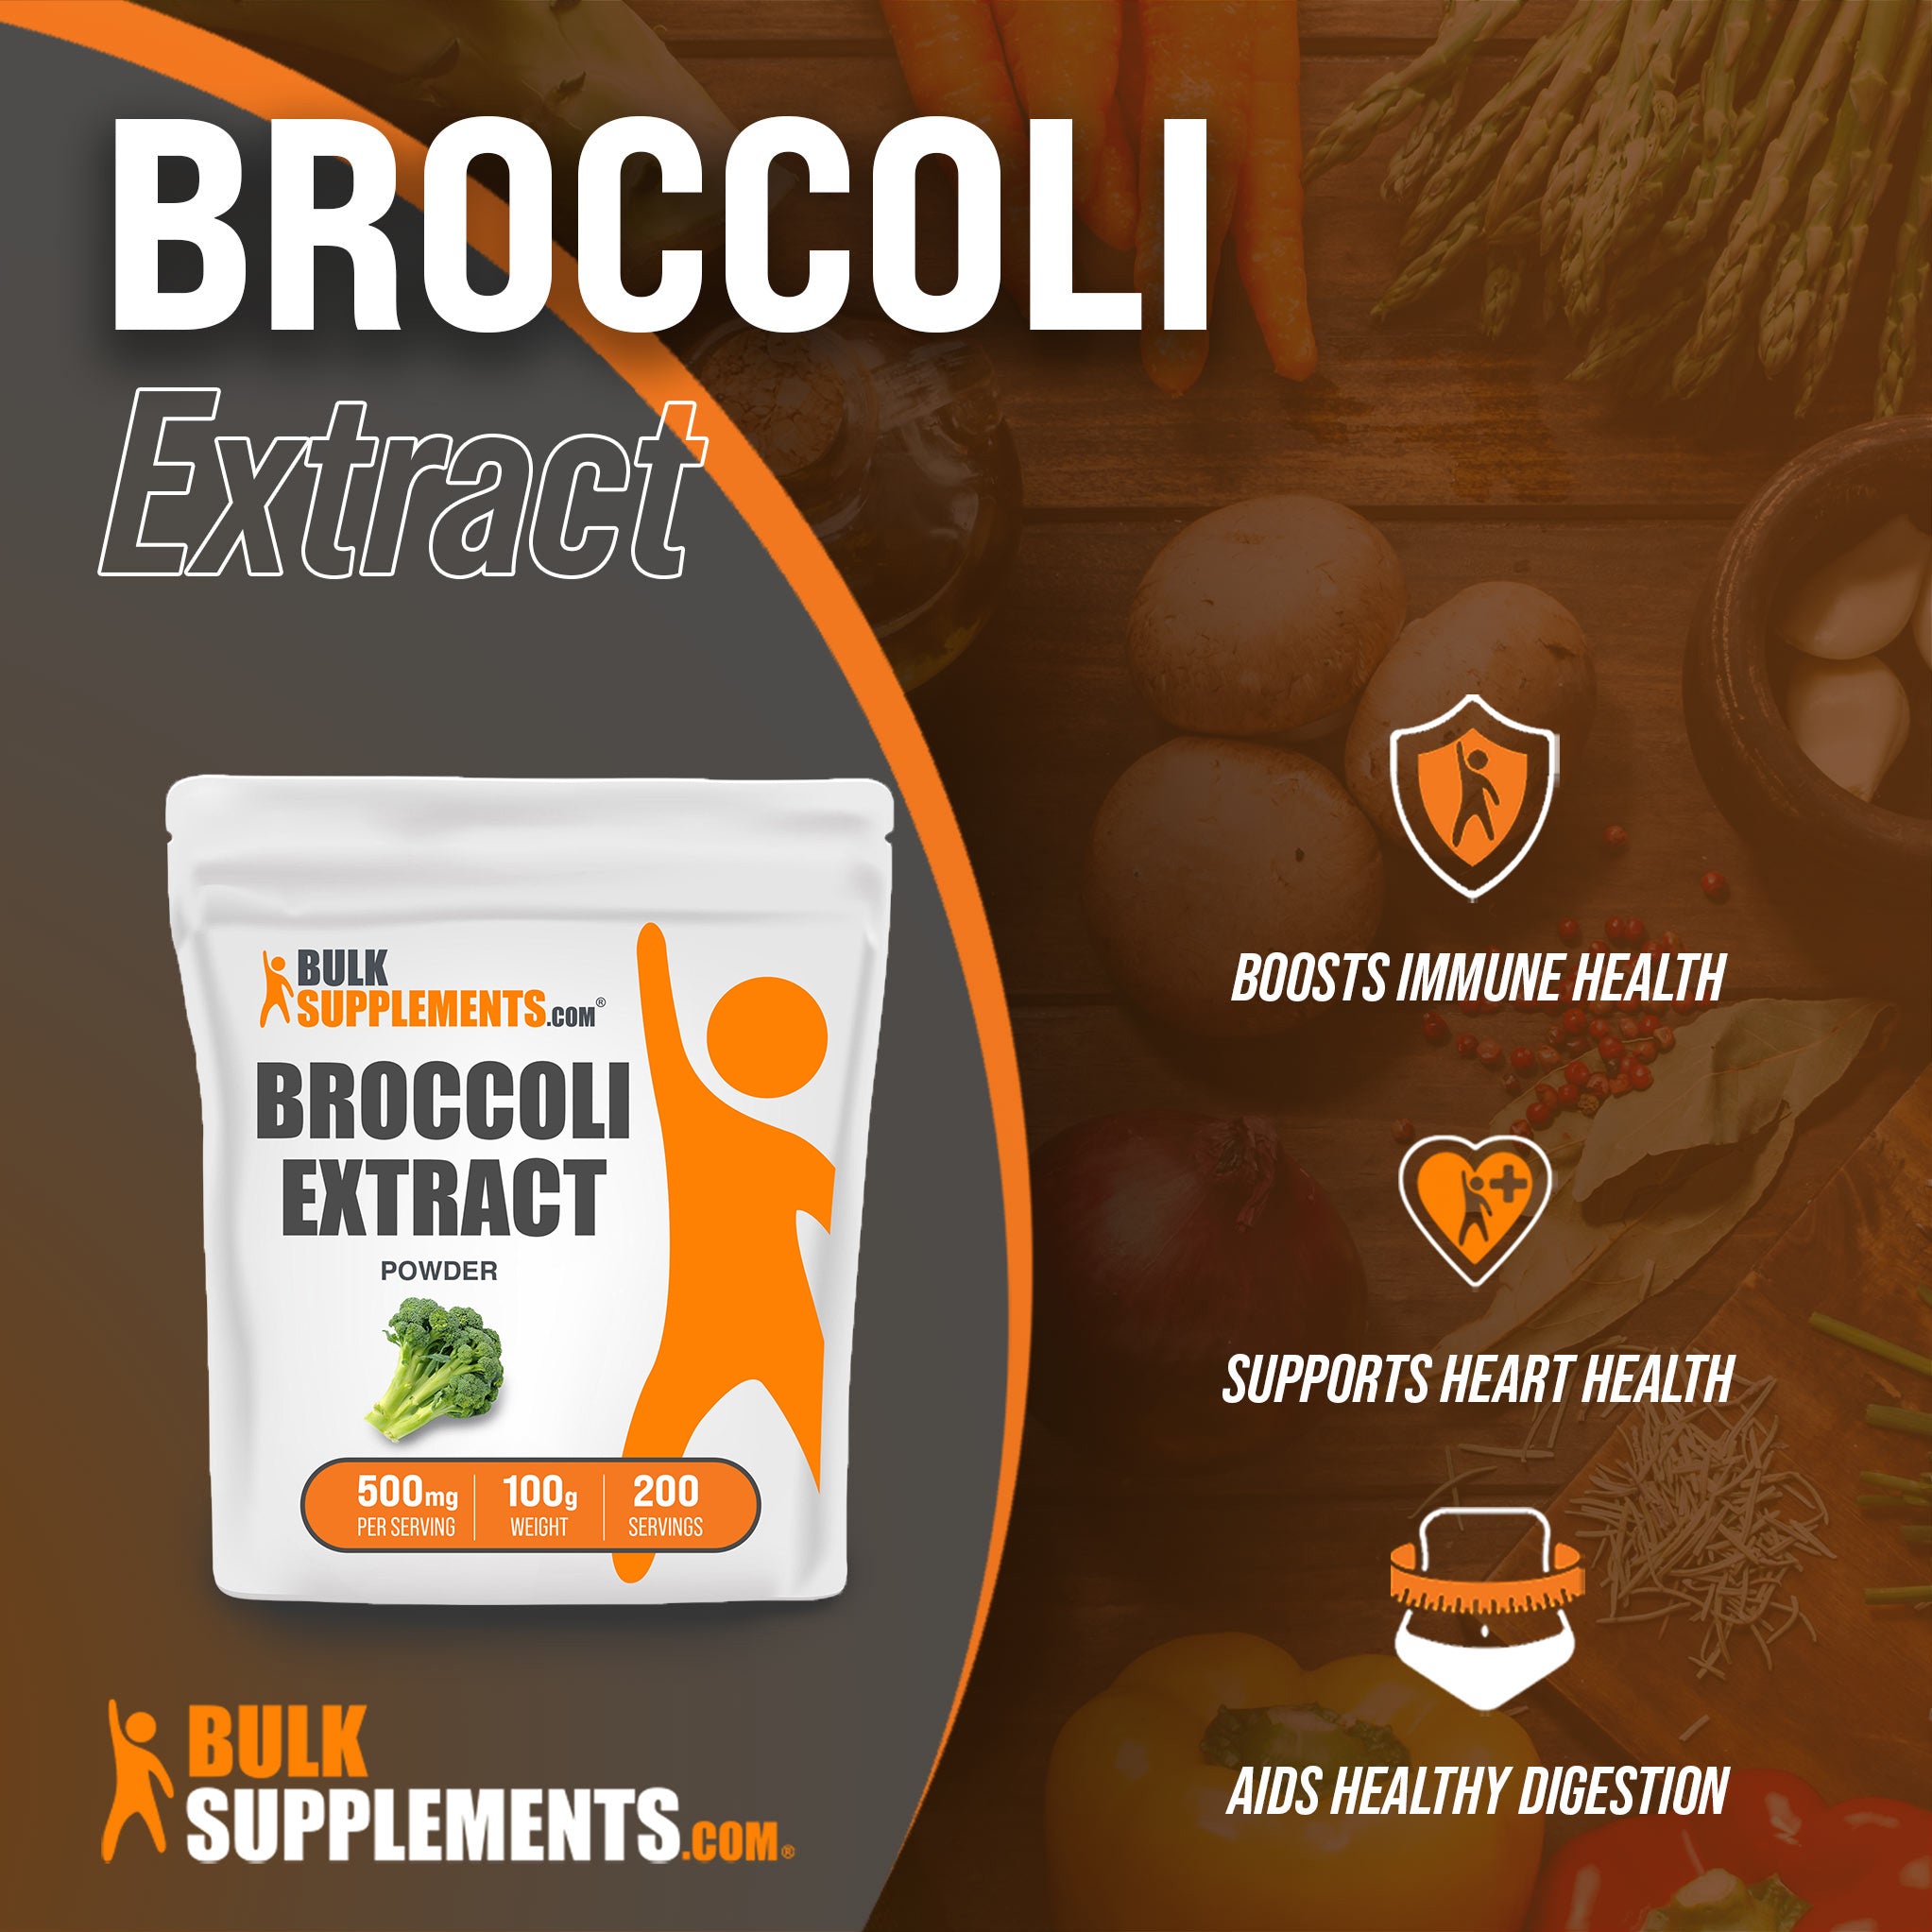 Benefits of Broccoli Extract; boosts immune health, supports heart health, aids healthy digestion